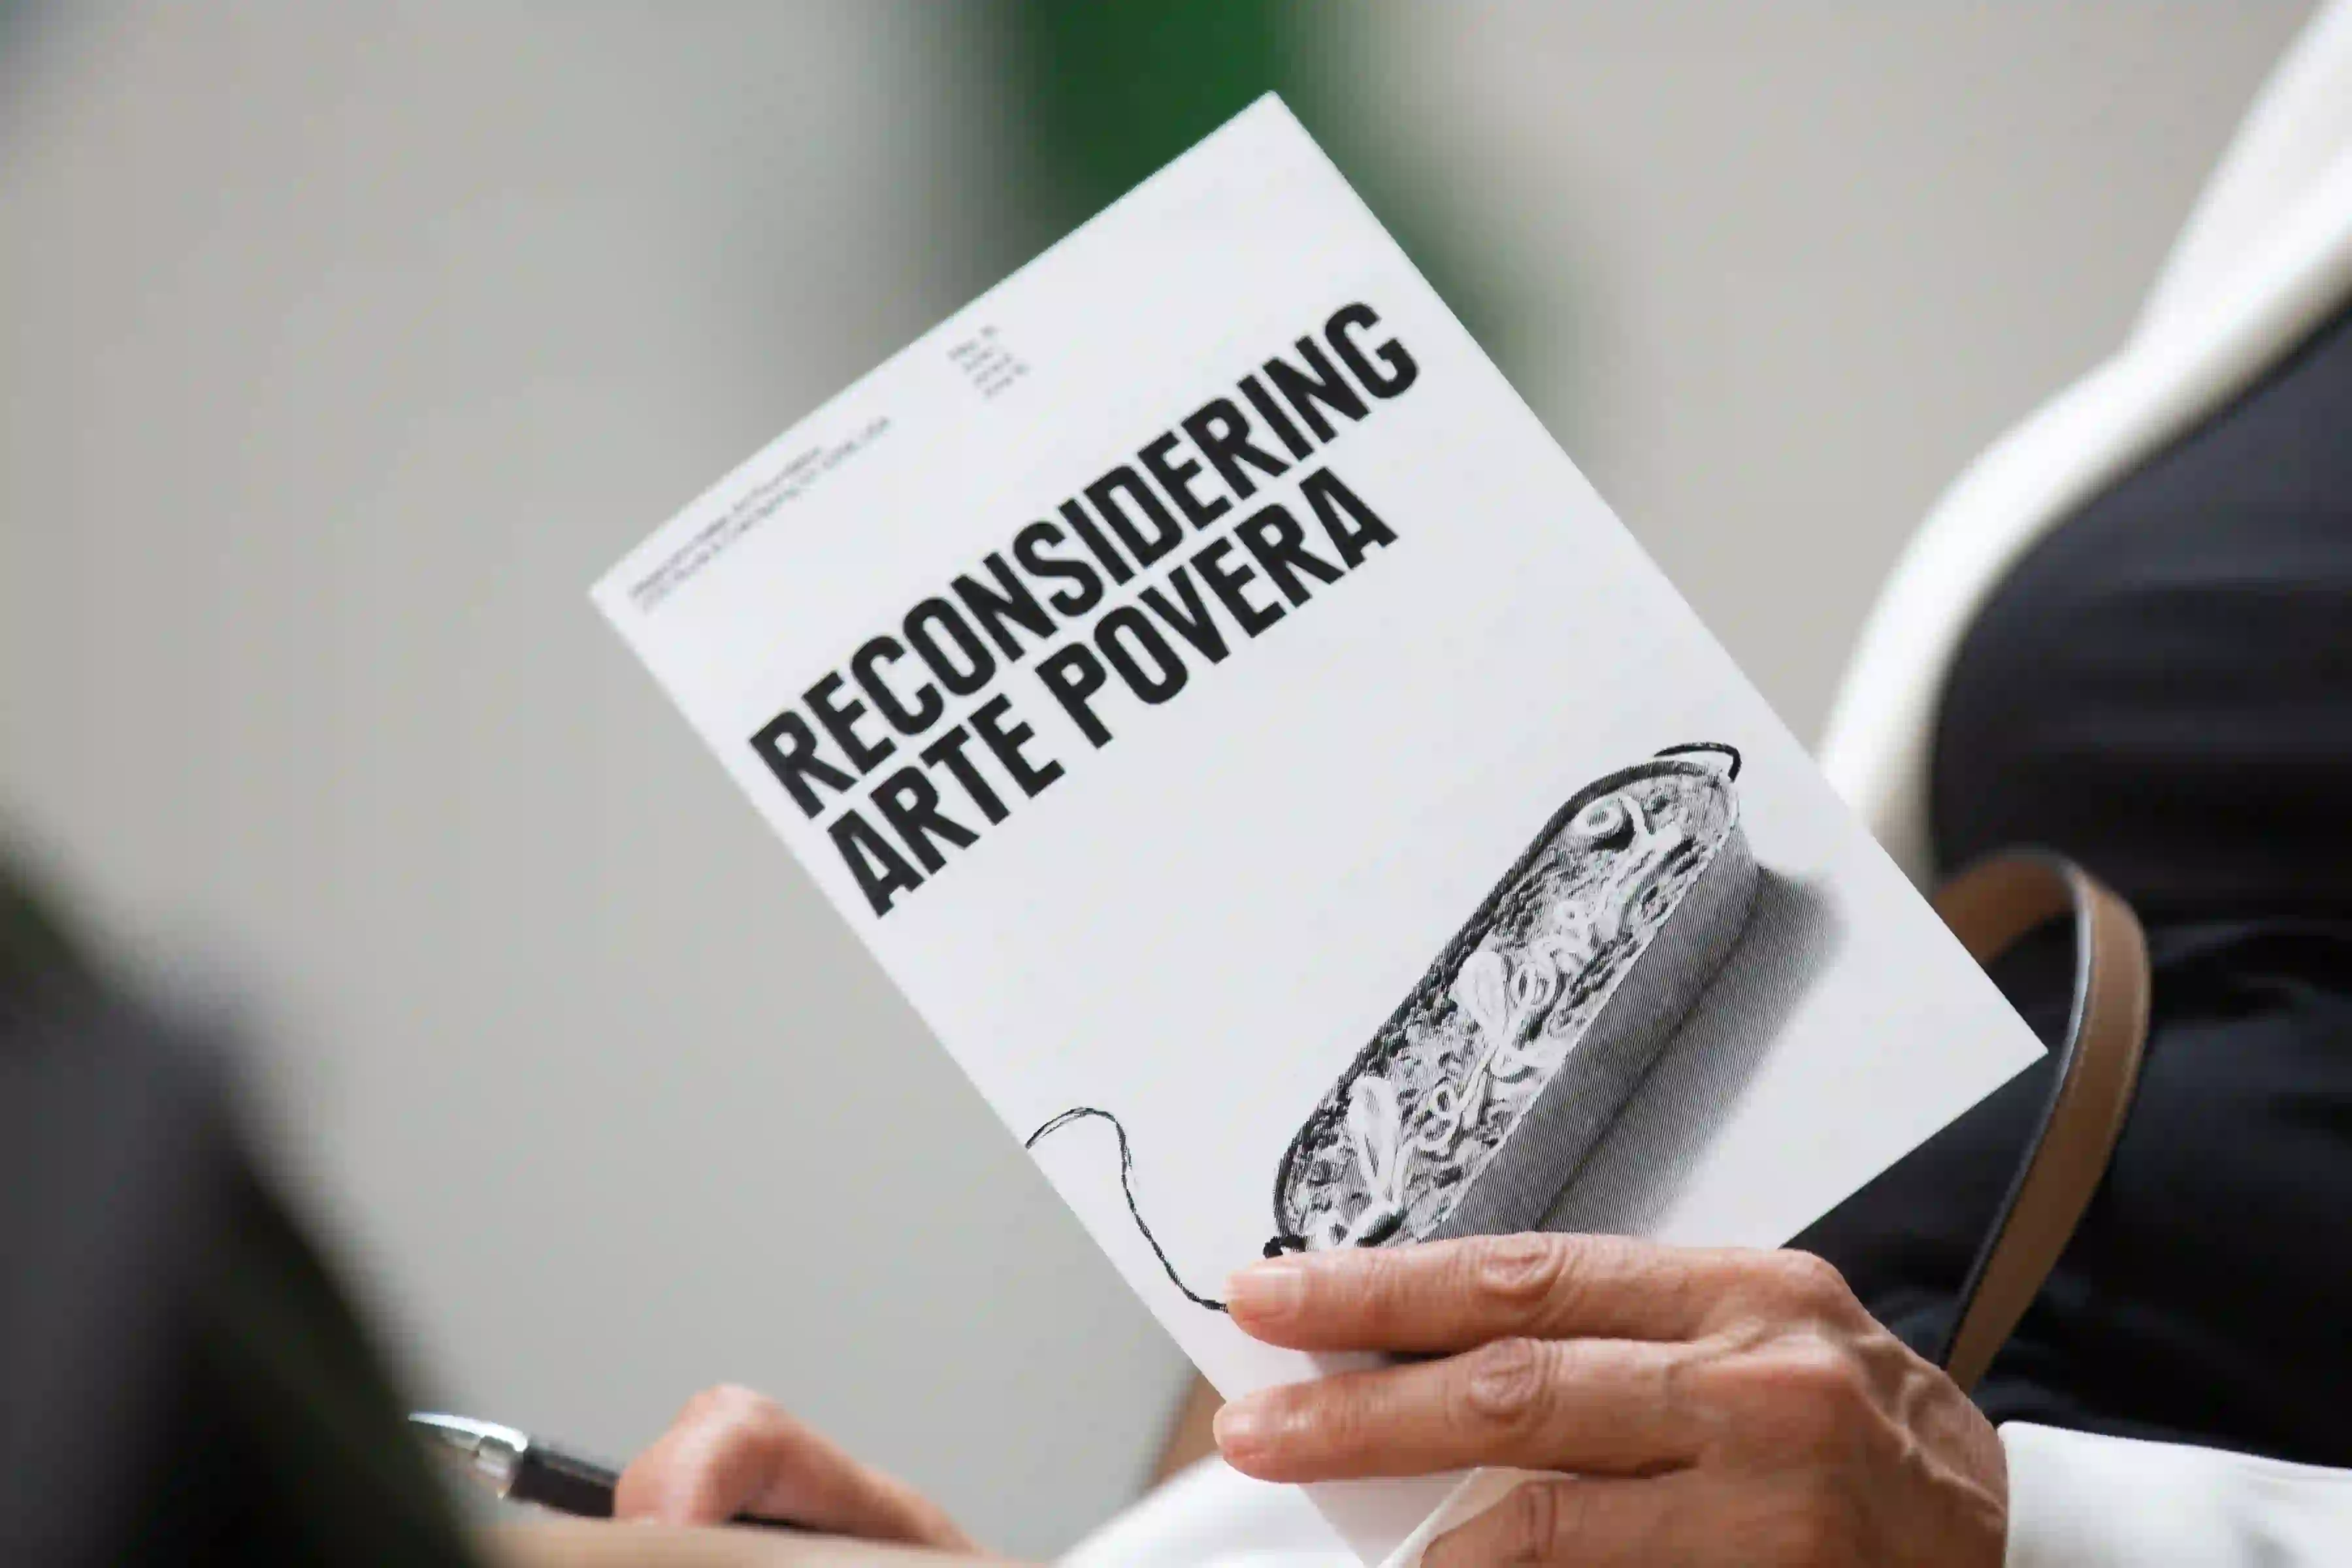 Reconsidering Arte Povera lecture series leaflet